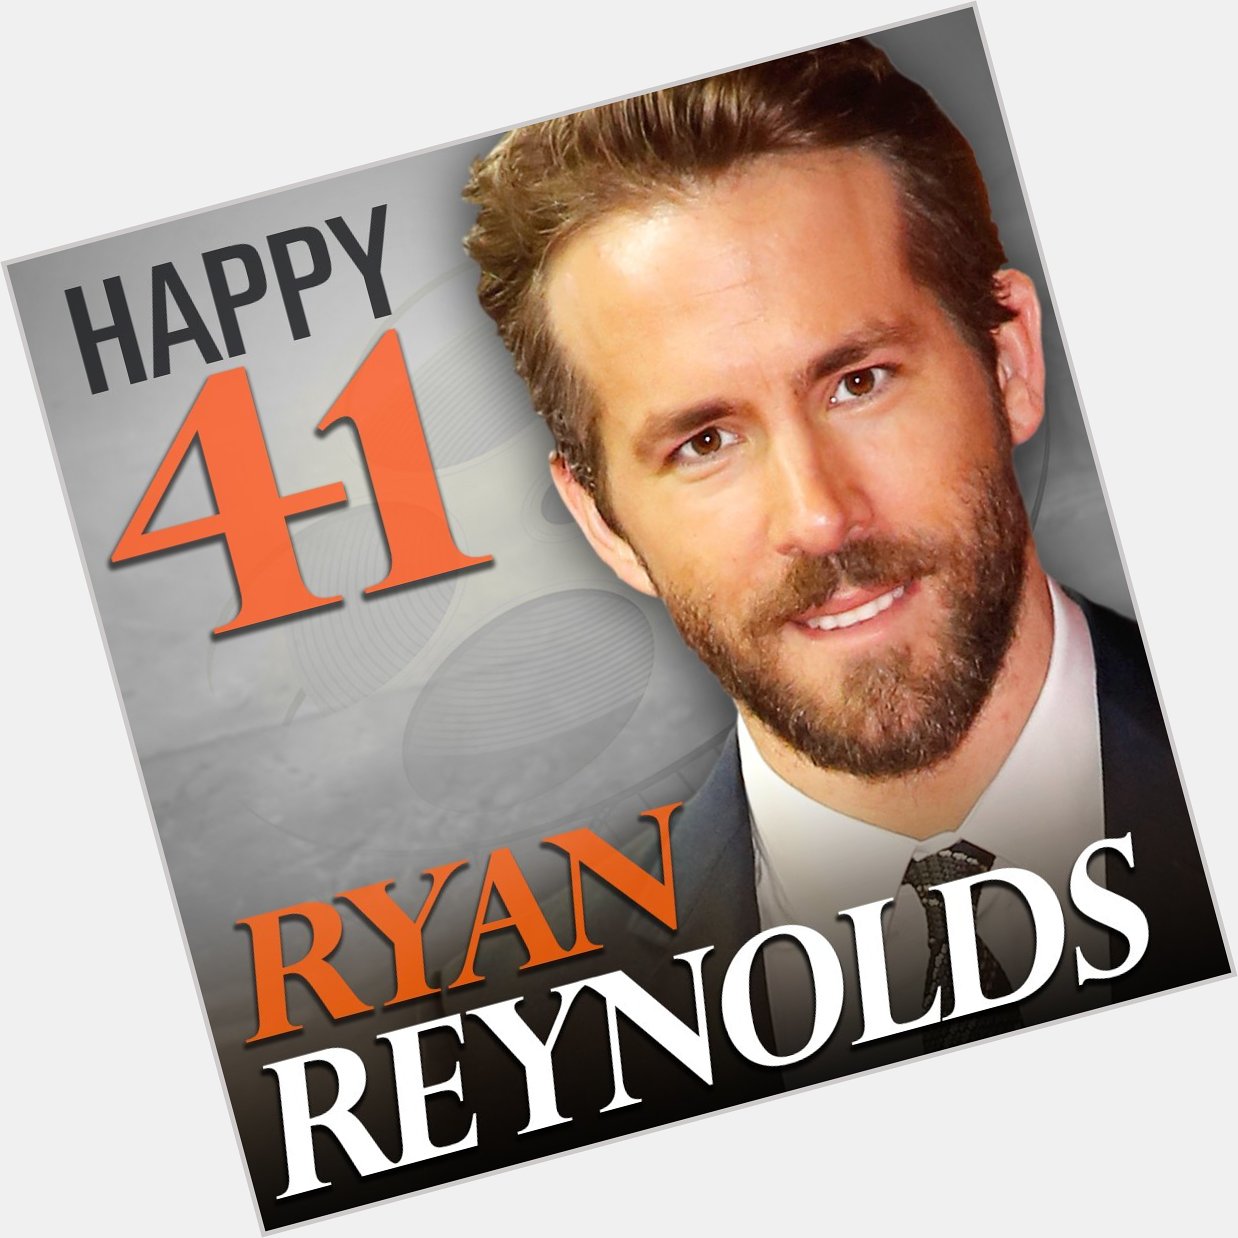 Happy birthday to actor Ryan Reynolds. The Deadpool actor turns 41 today!  